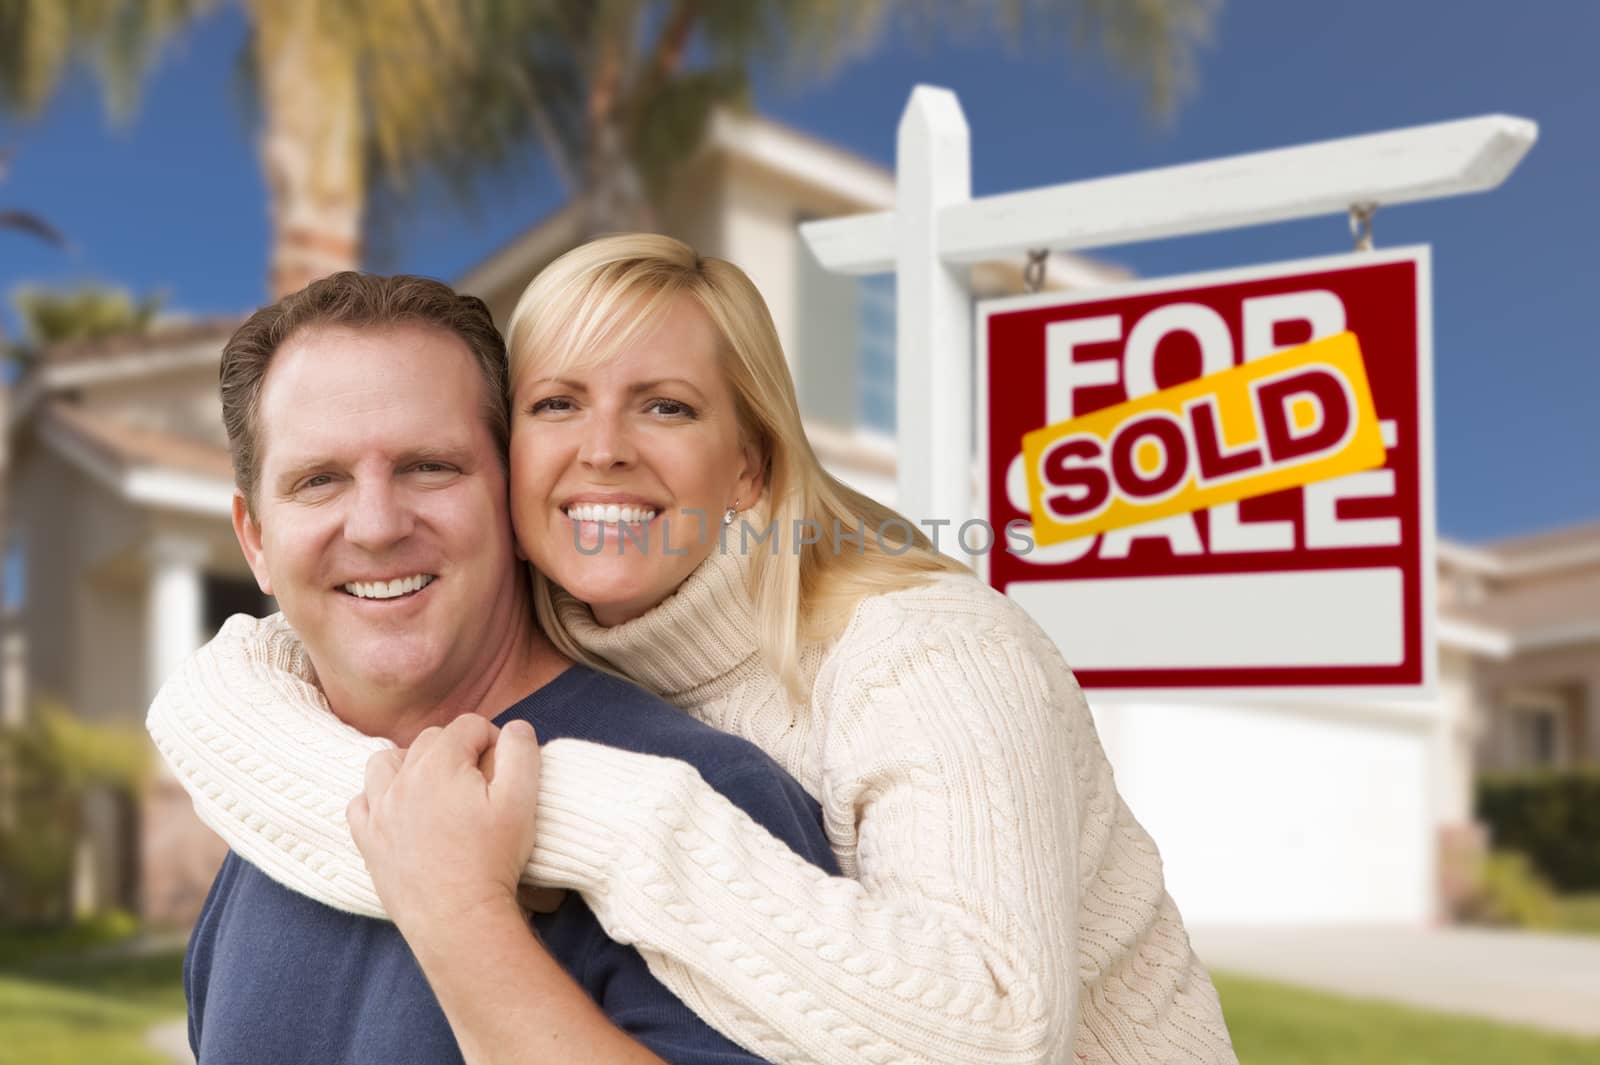 Happy Couple Hugging in Front of Sold Real Estate Sign and House.